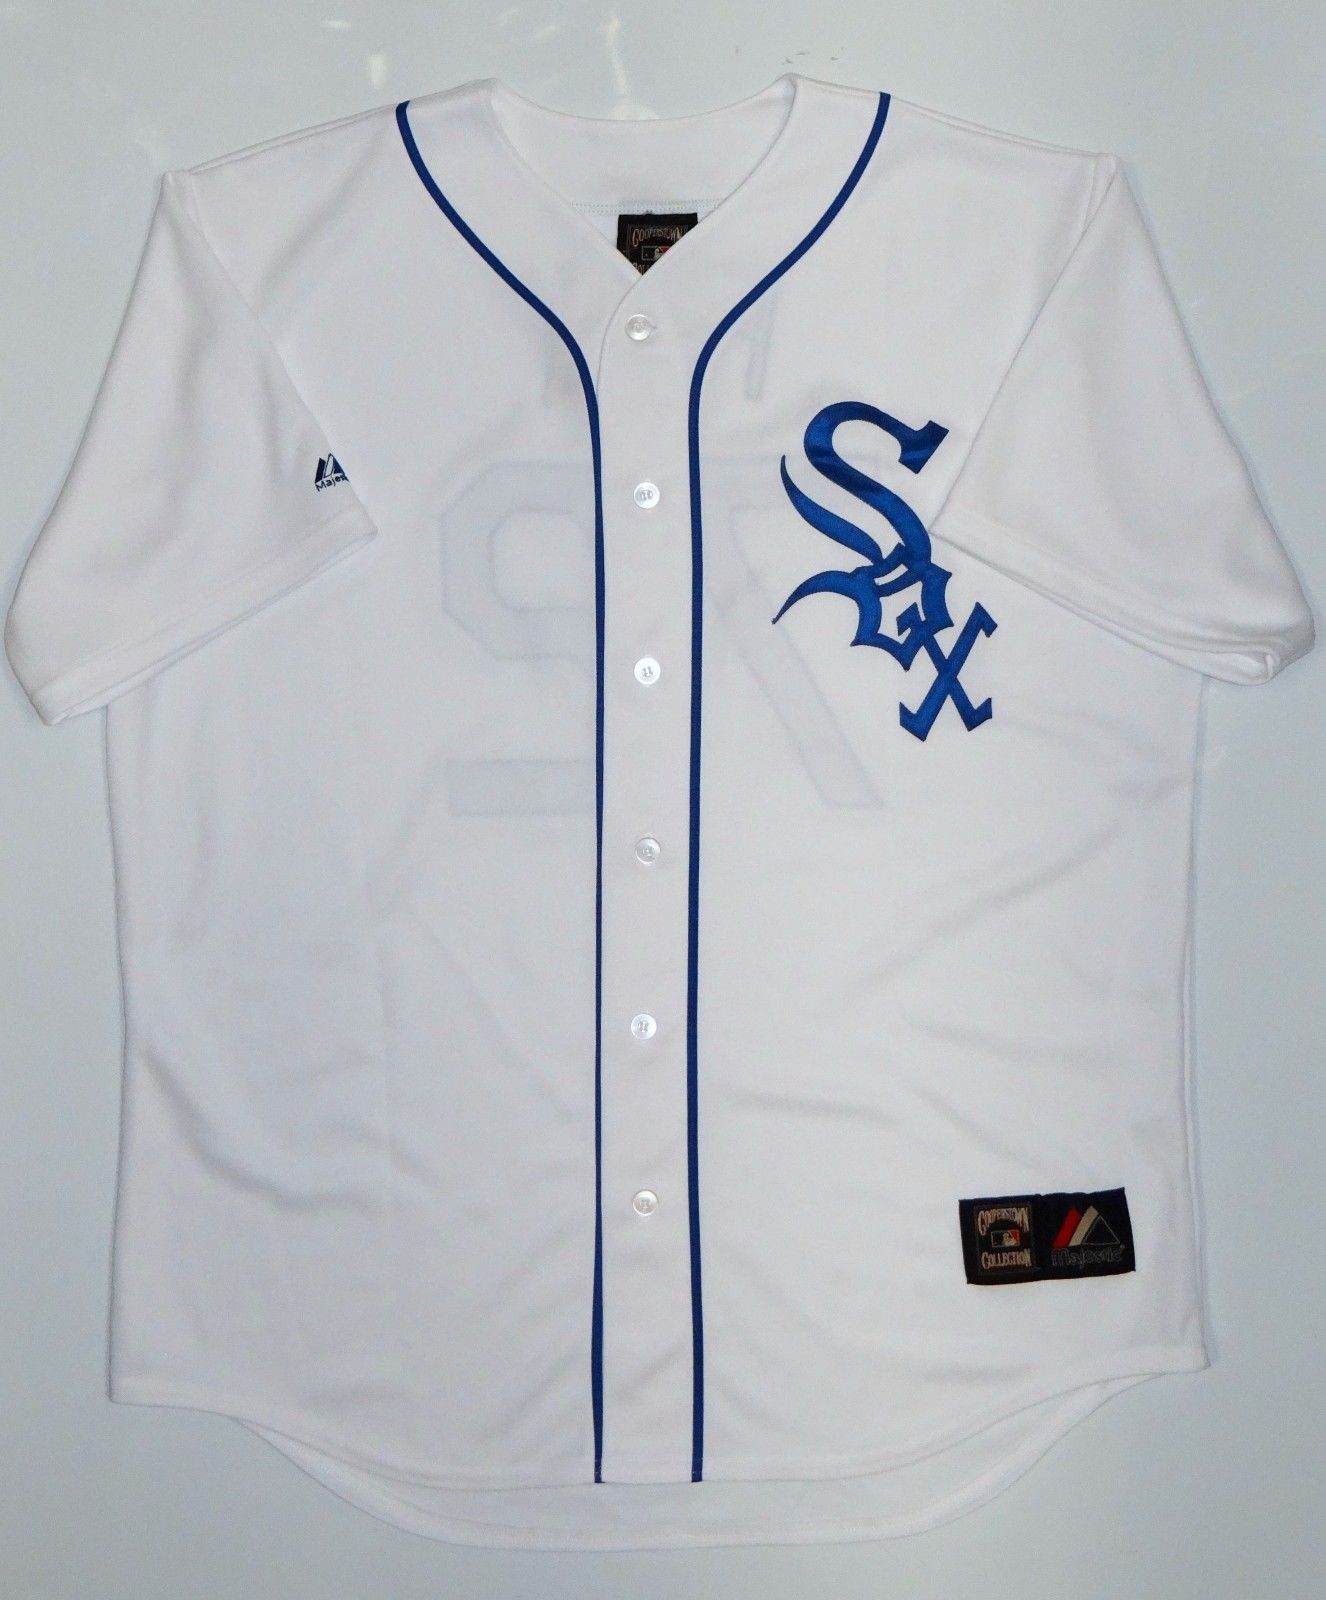 Carlton Fisk autographed Jersey (Chicago White Sox)